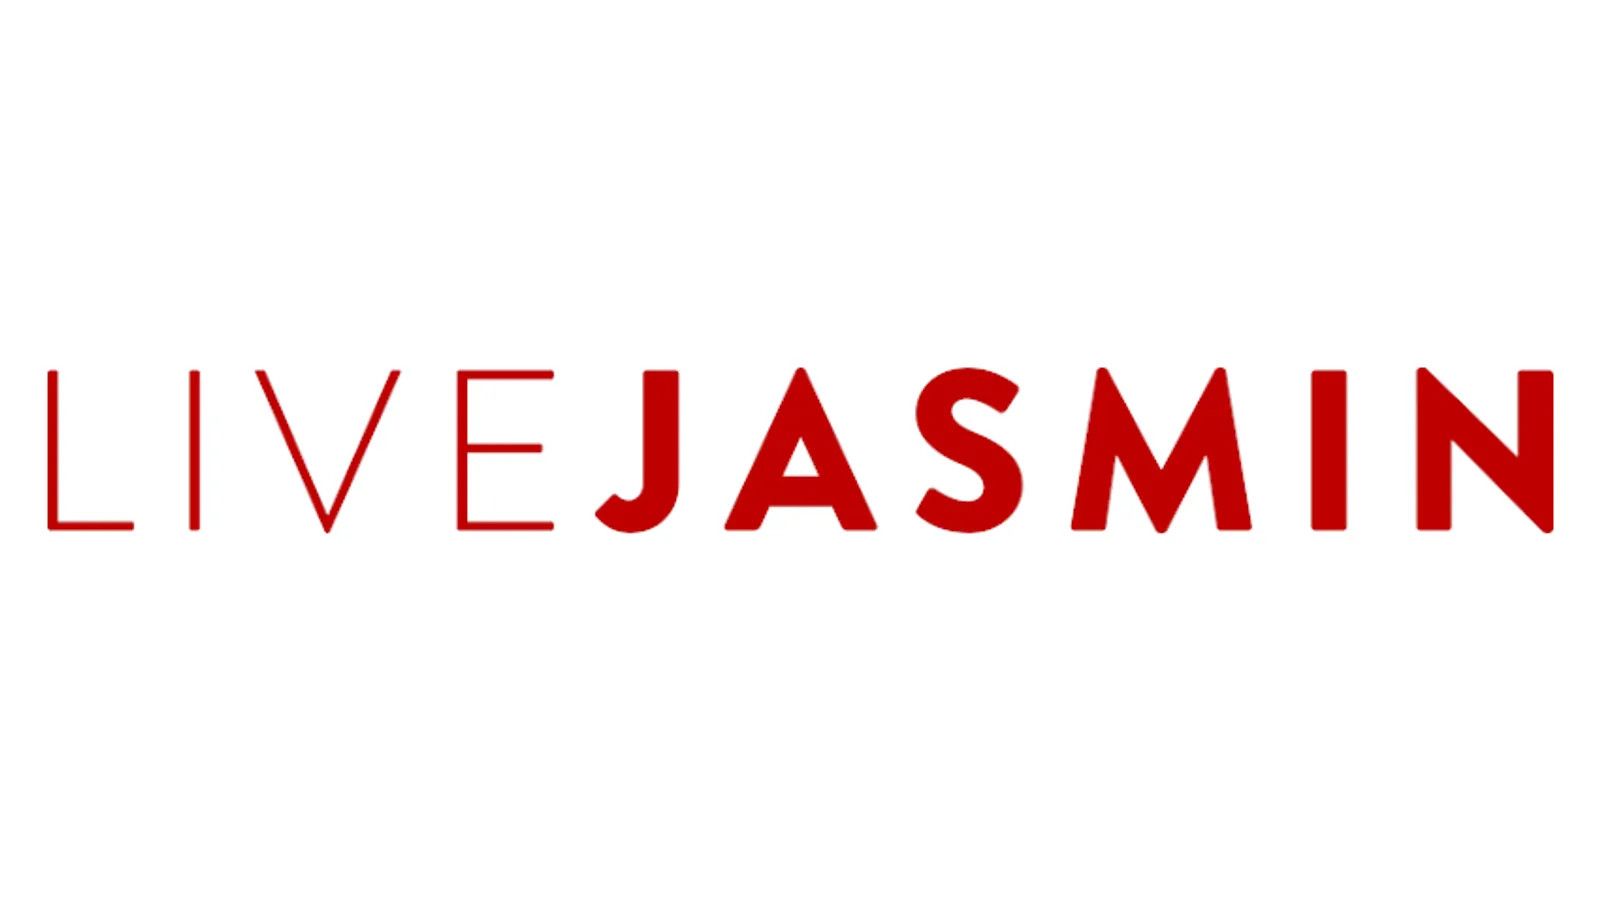 LiveJasmin Releases Results of Survey of Its Users